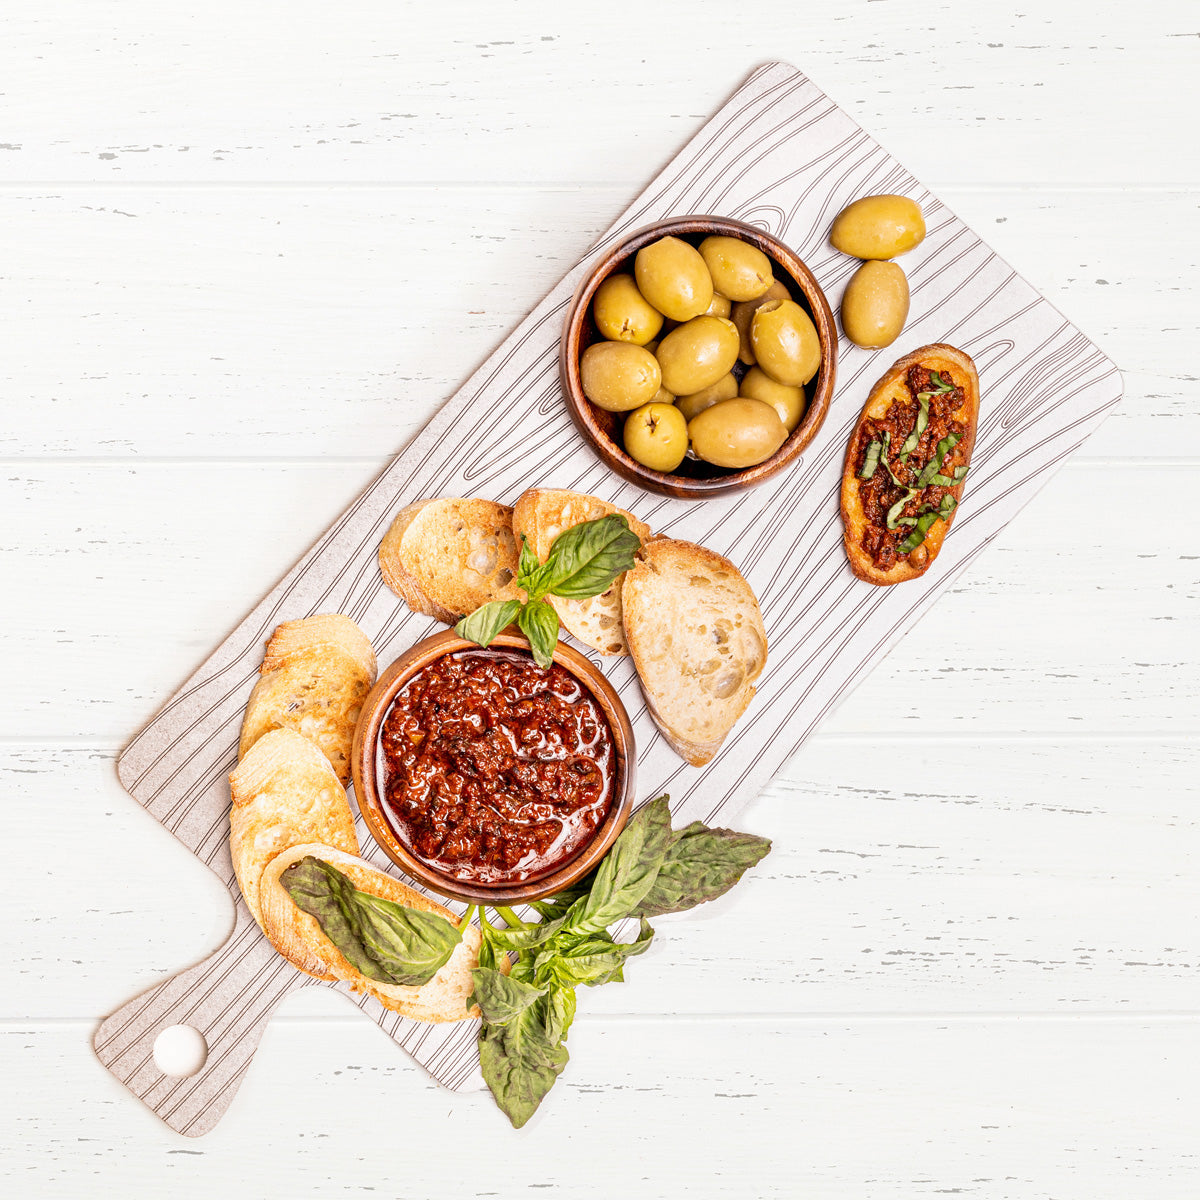 Woodland Serving Board - Stainless Steel